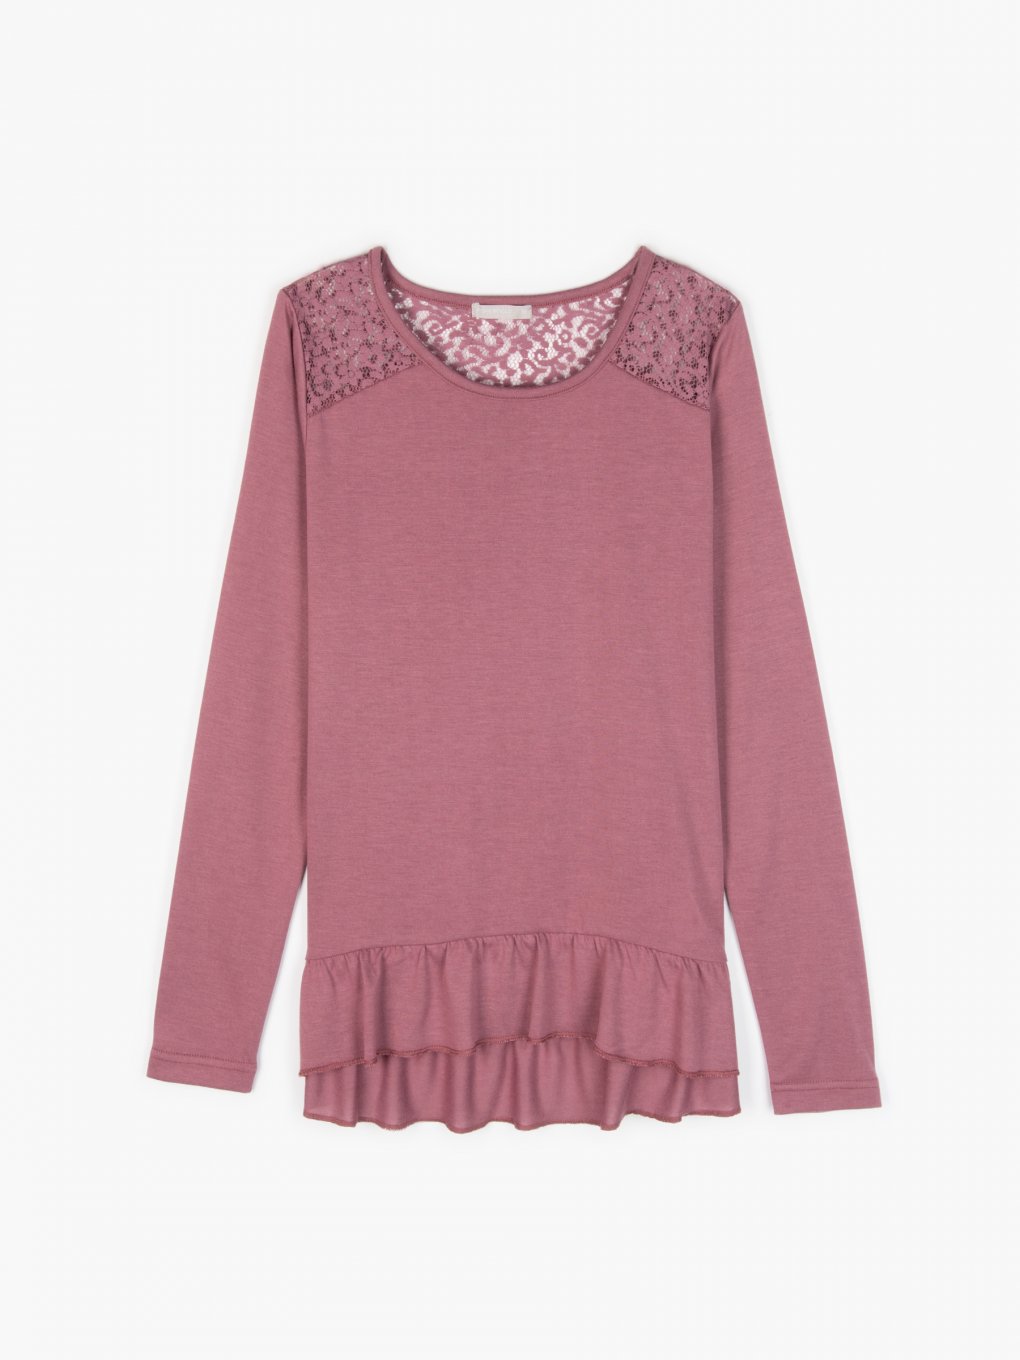 Ruffle top with lace details